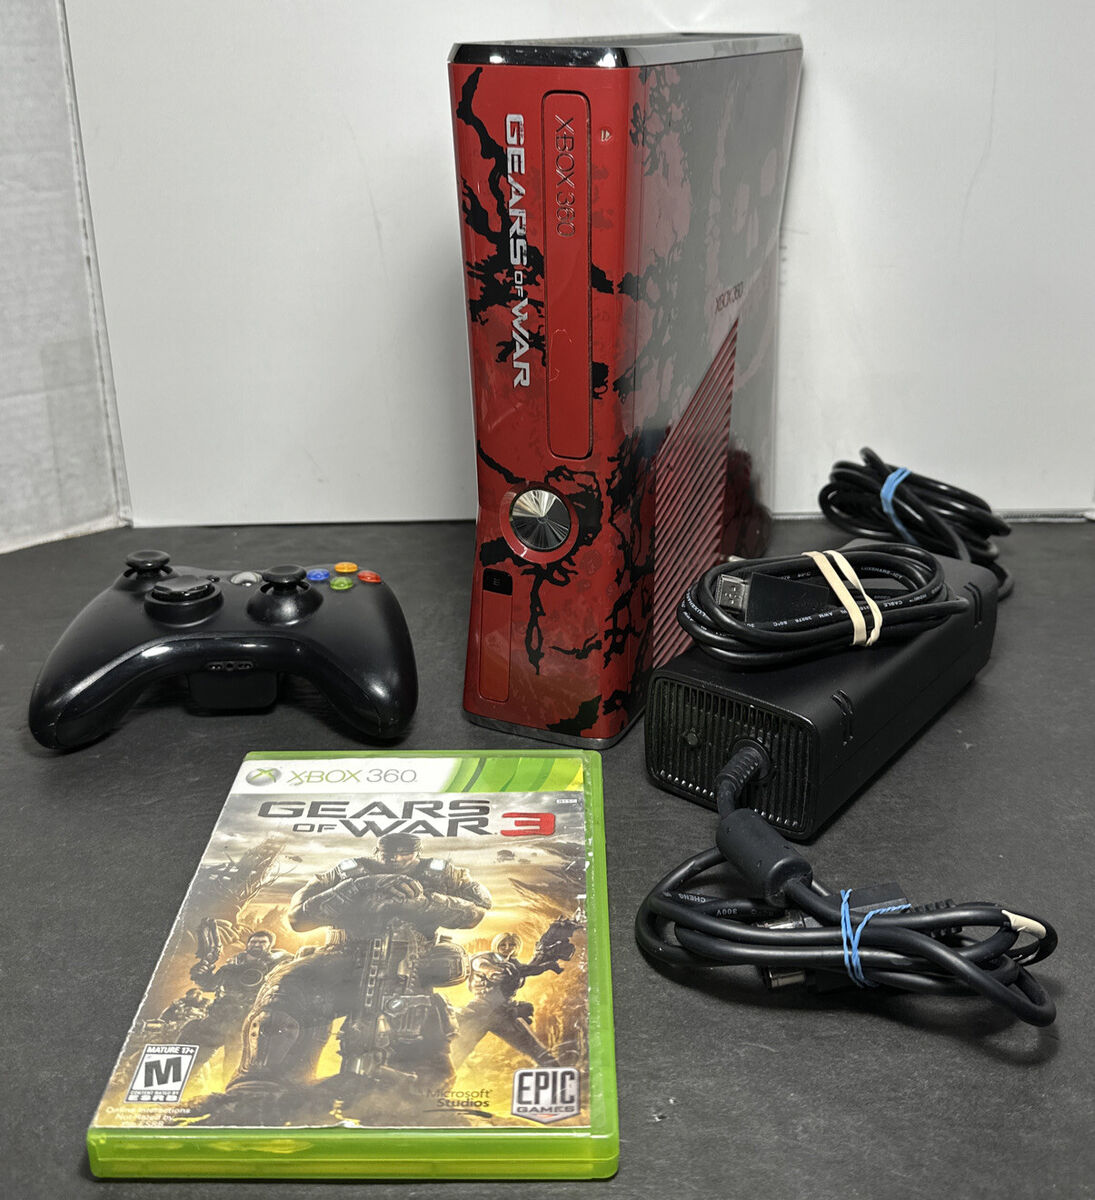 Xbox 360 Gears Of War 3 Limited Edition Console Bundle 